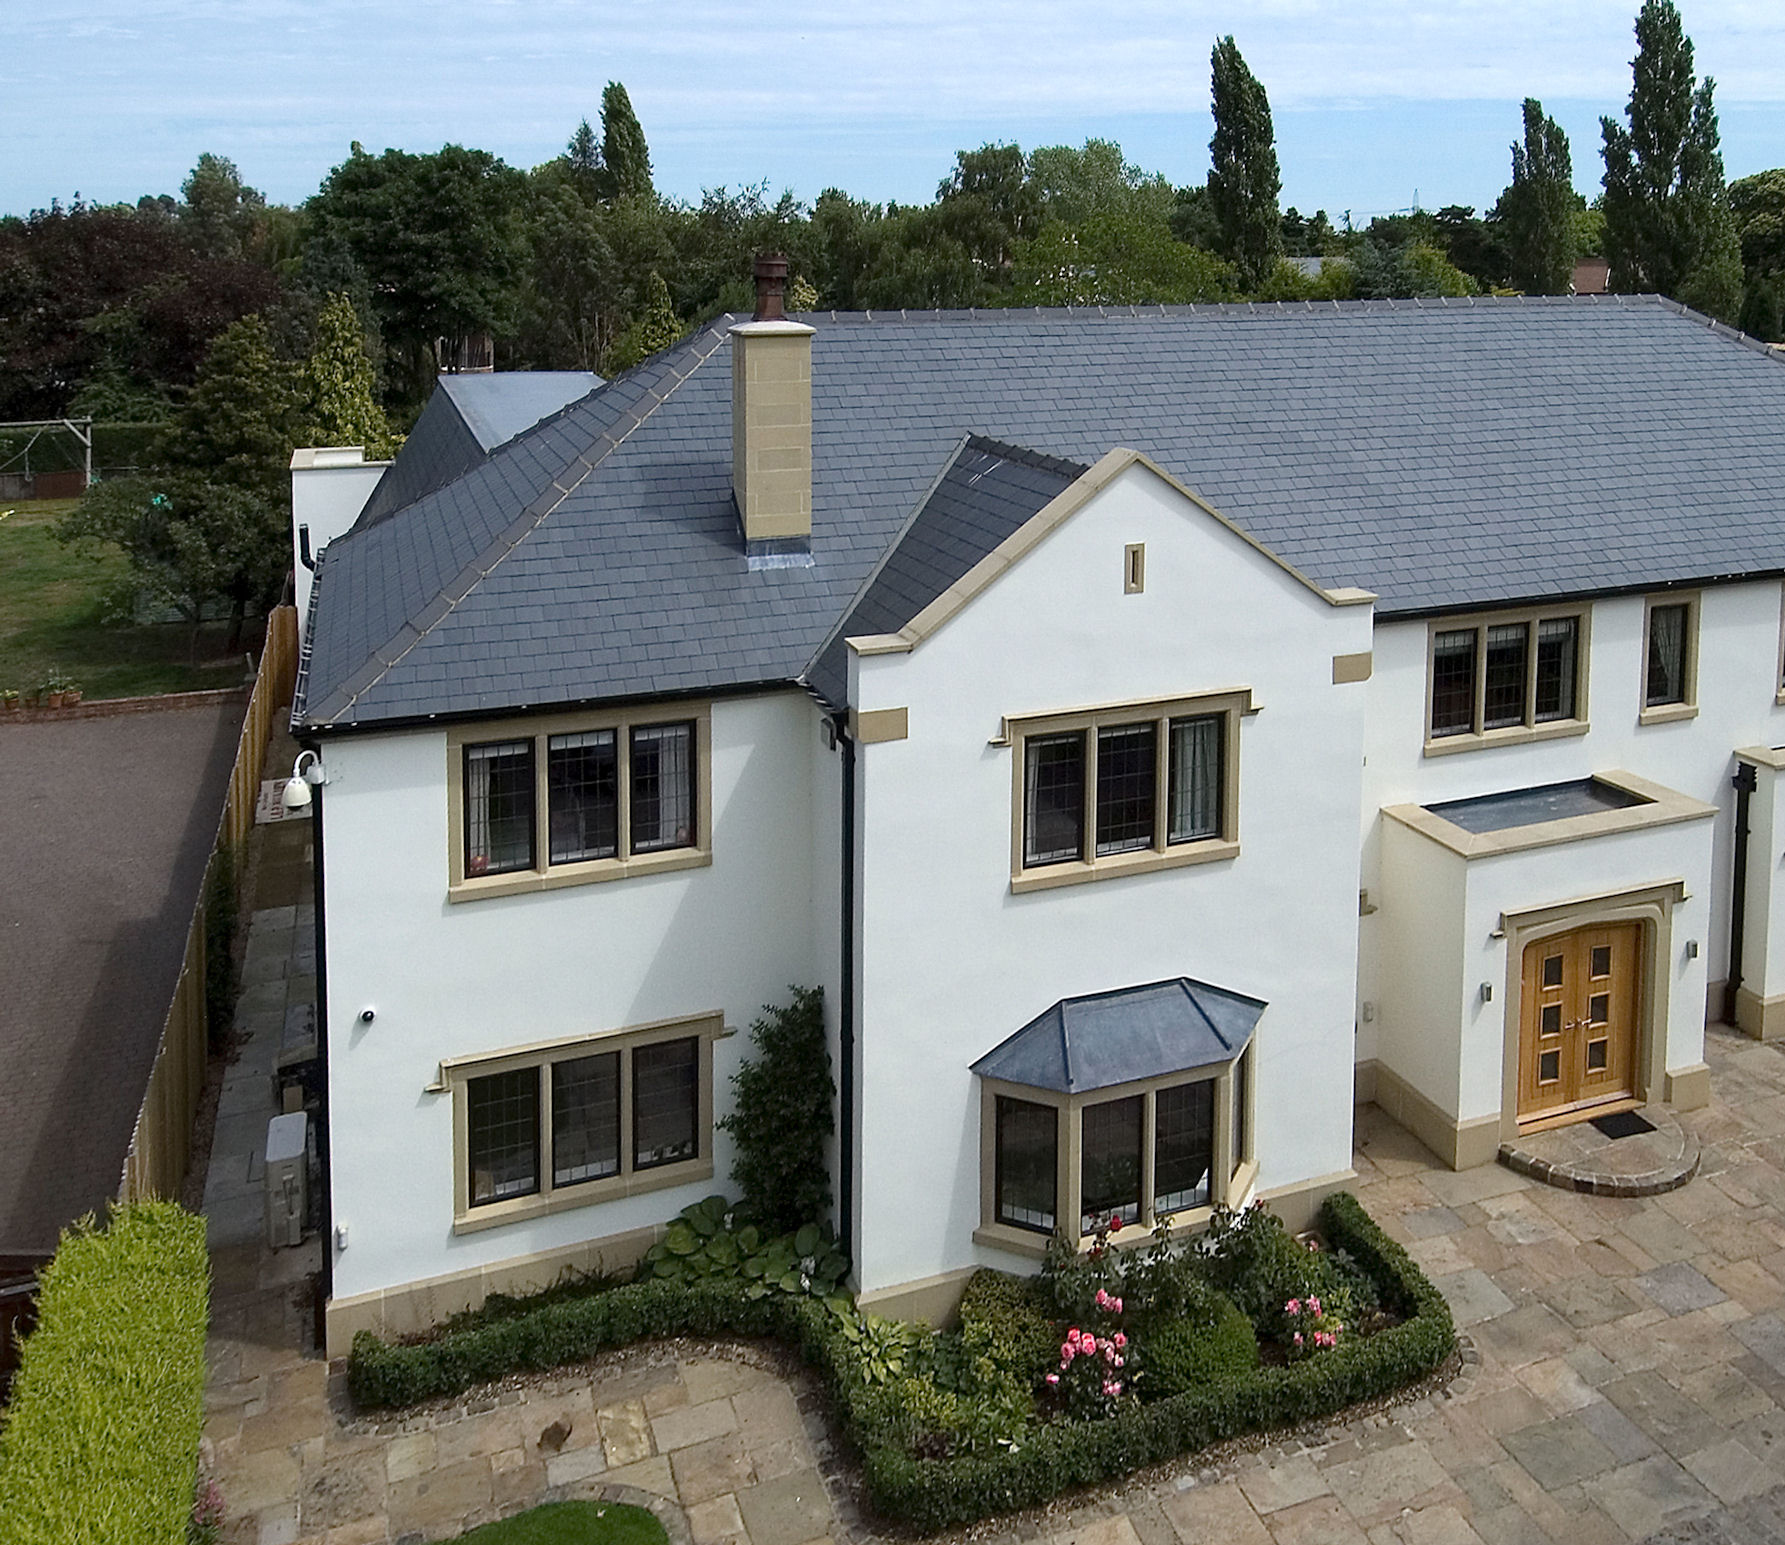 Cembrit Glendyne slates now guaranteed for 75 years